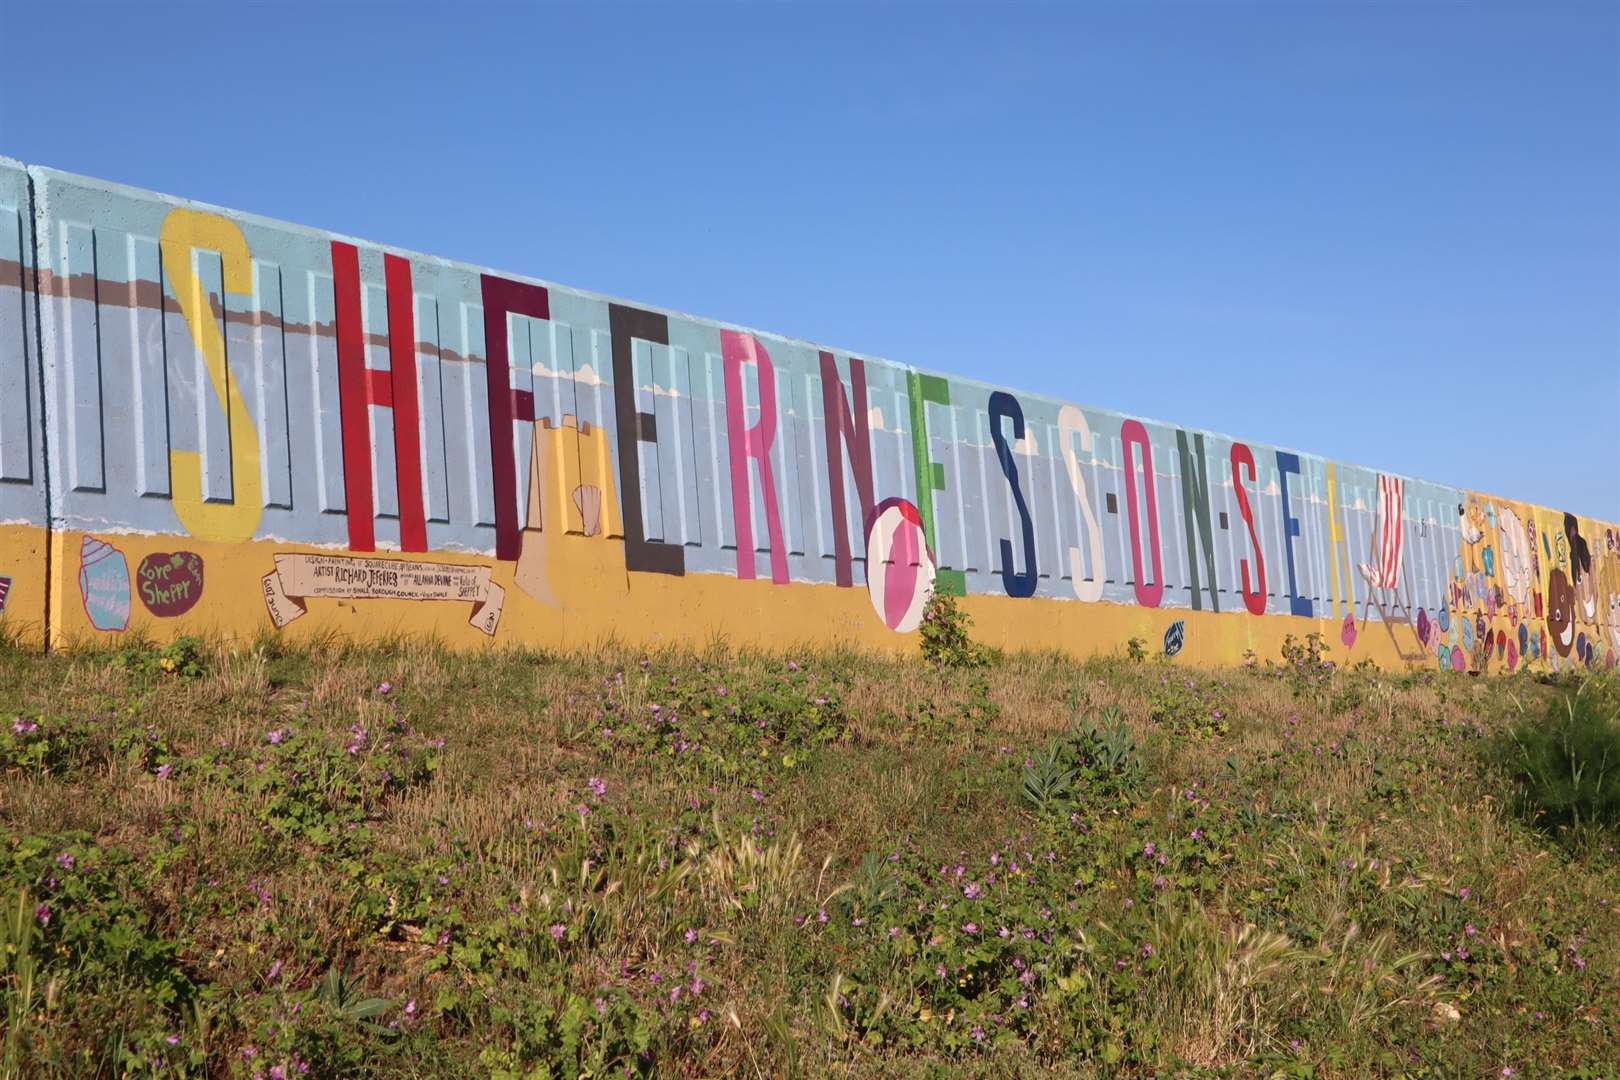 Sheerness-on-Sea beach mural painted by Richard Jeferies